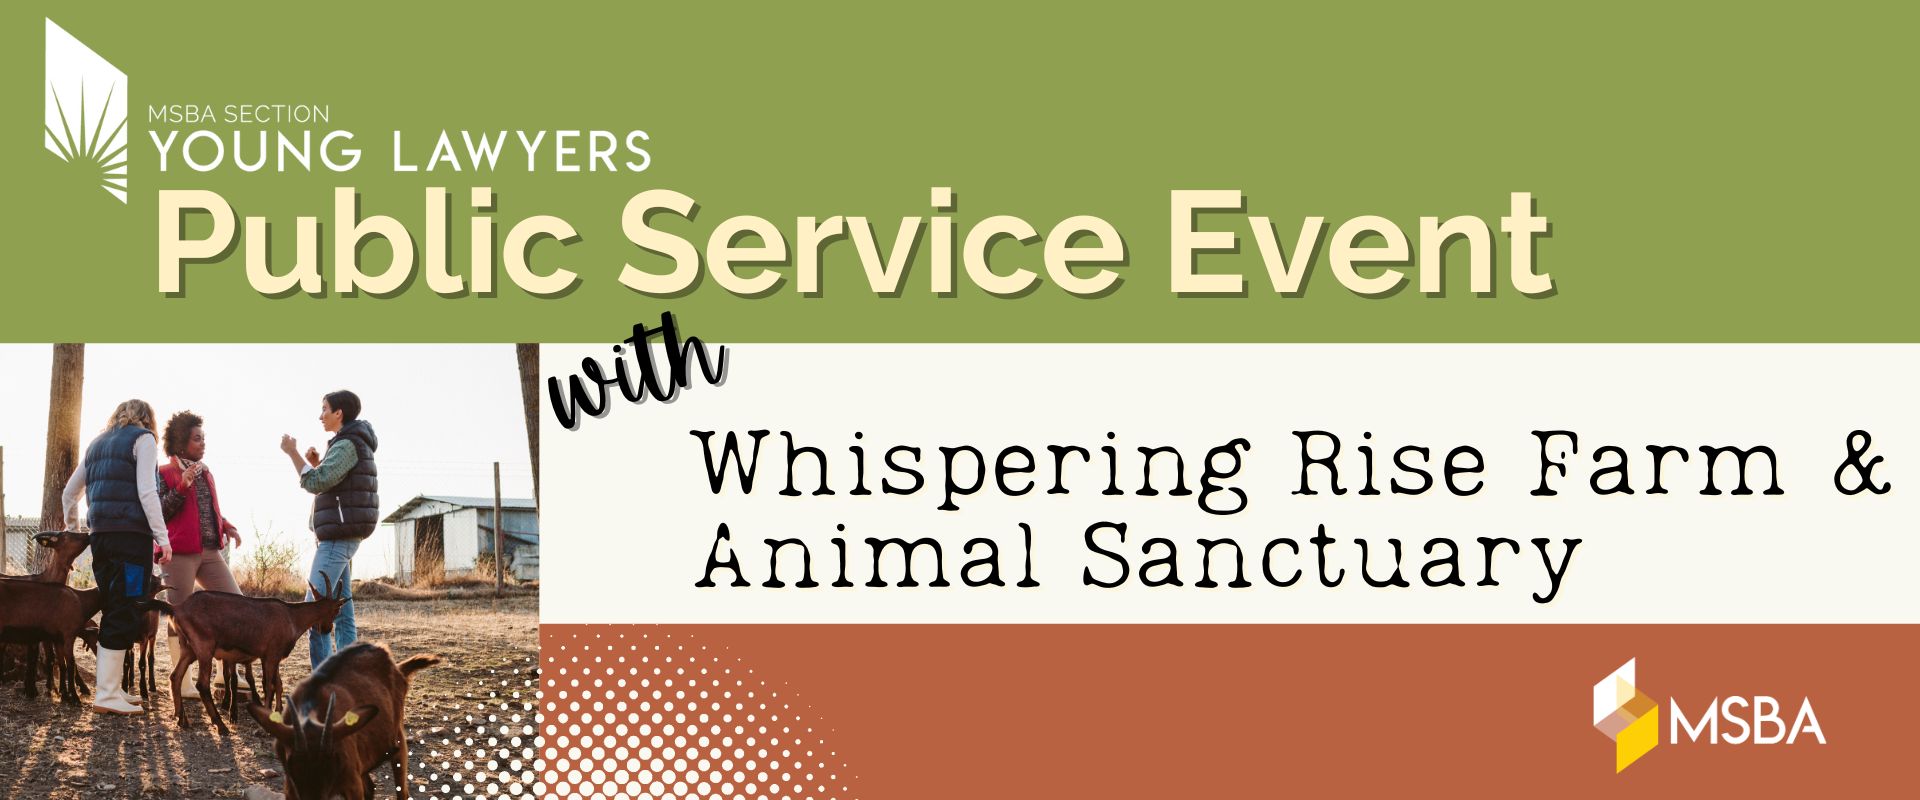 Public Service Event with Whispering Rise Farm